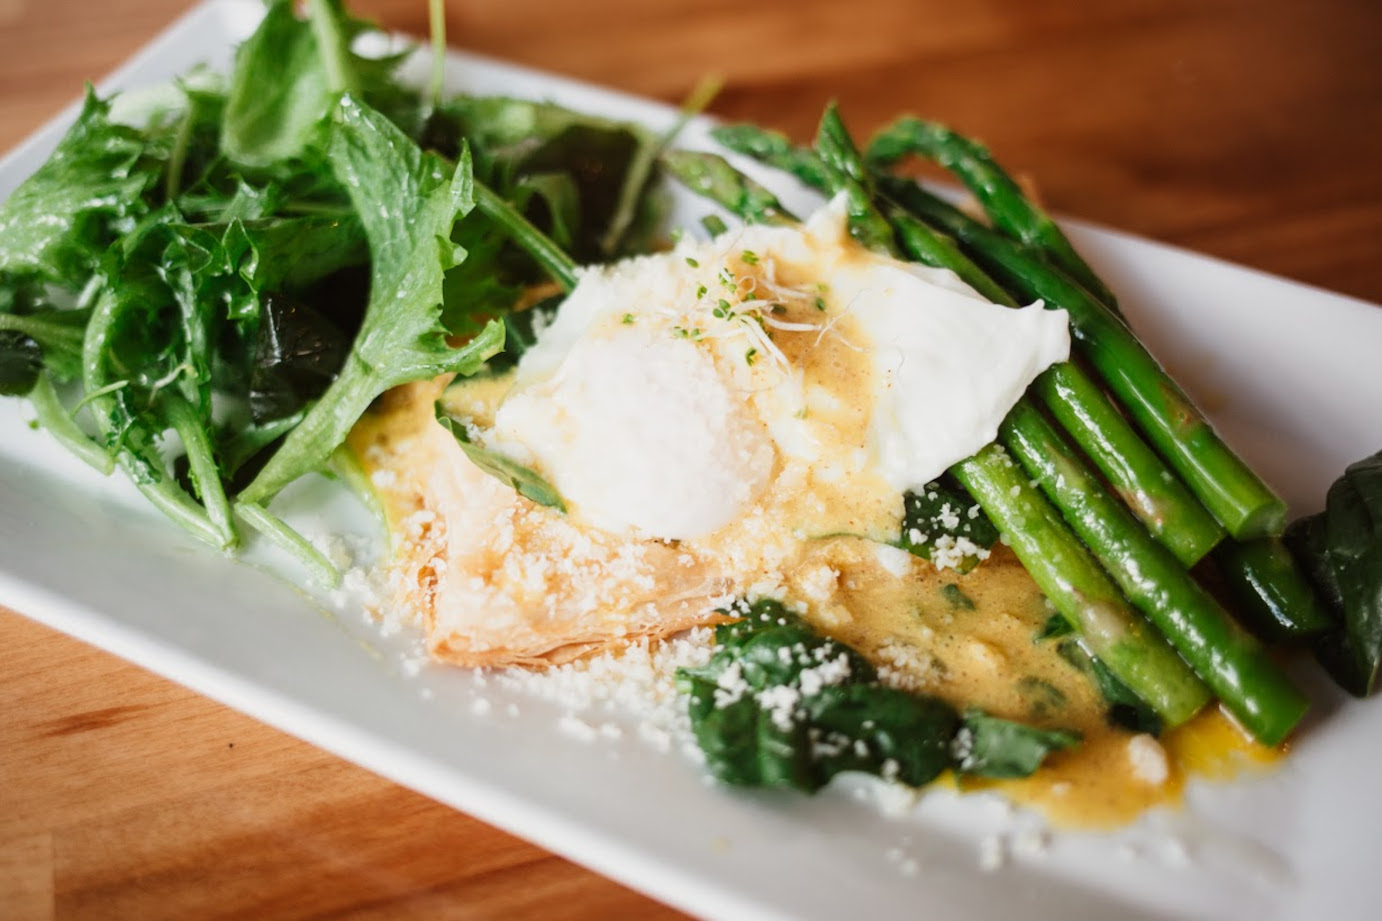 Puff Pastry Benedict with green salad and asparagus